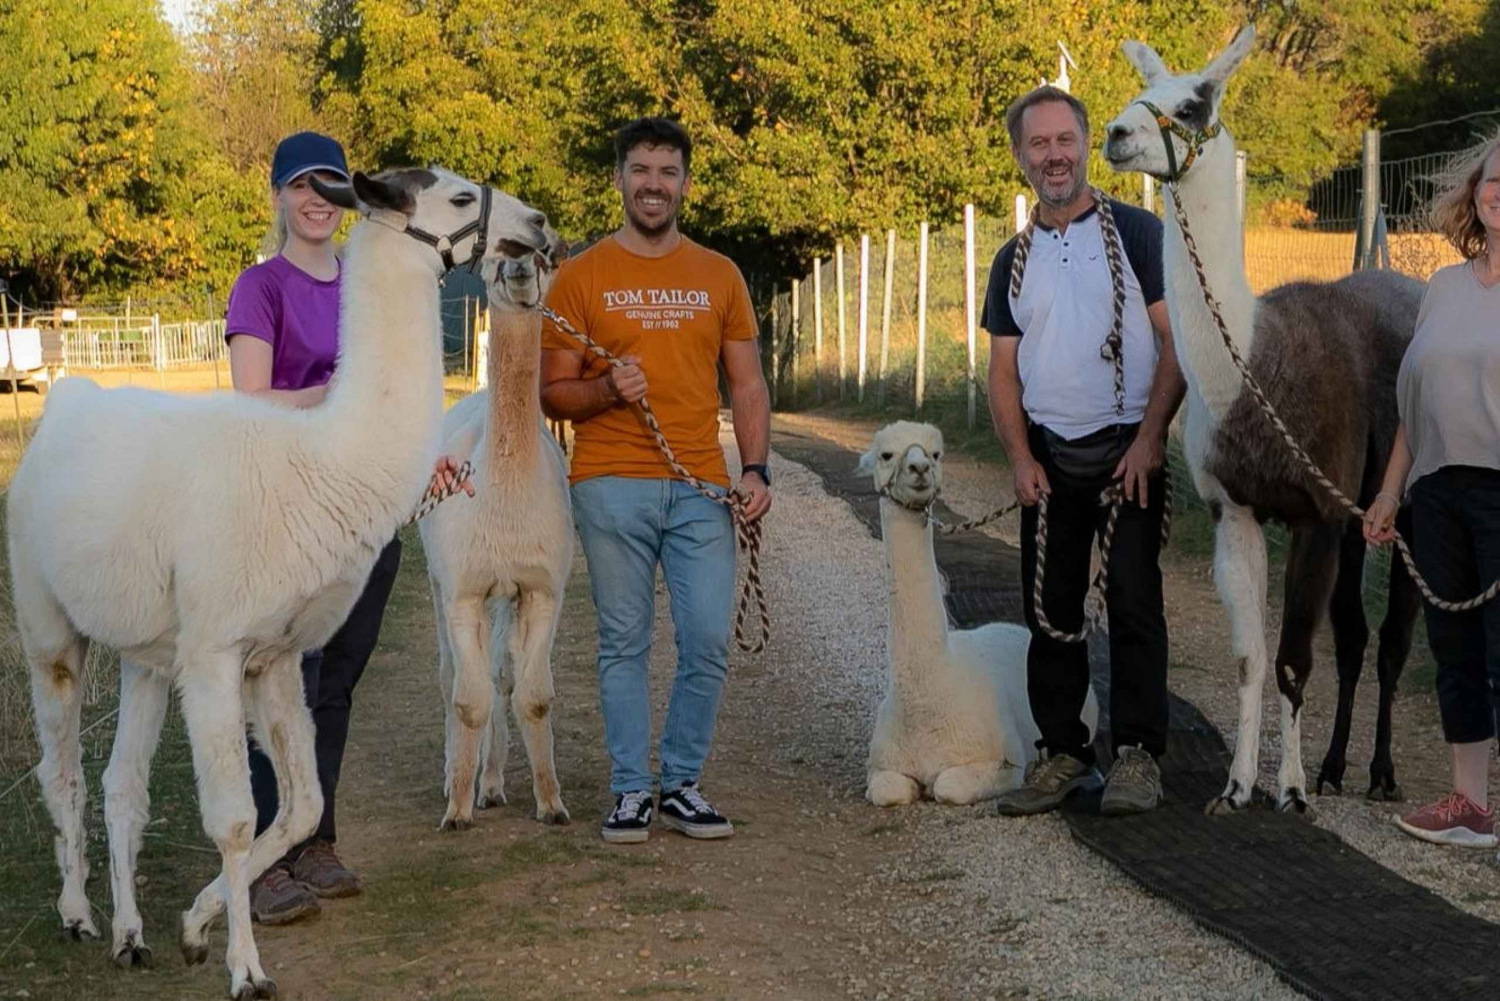 Mödling Vienna: Scenic Guided Hike with Alpacas and Llamas